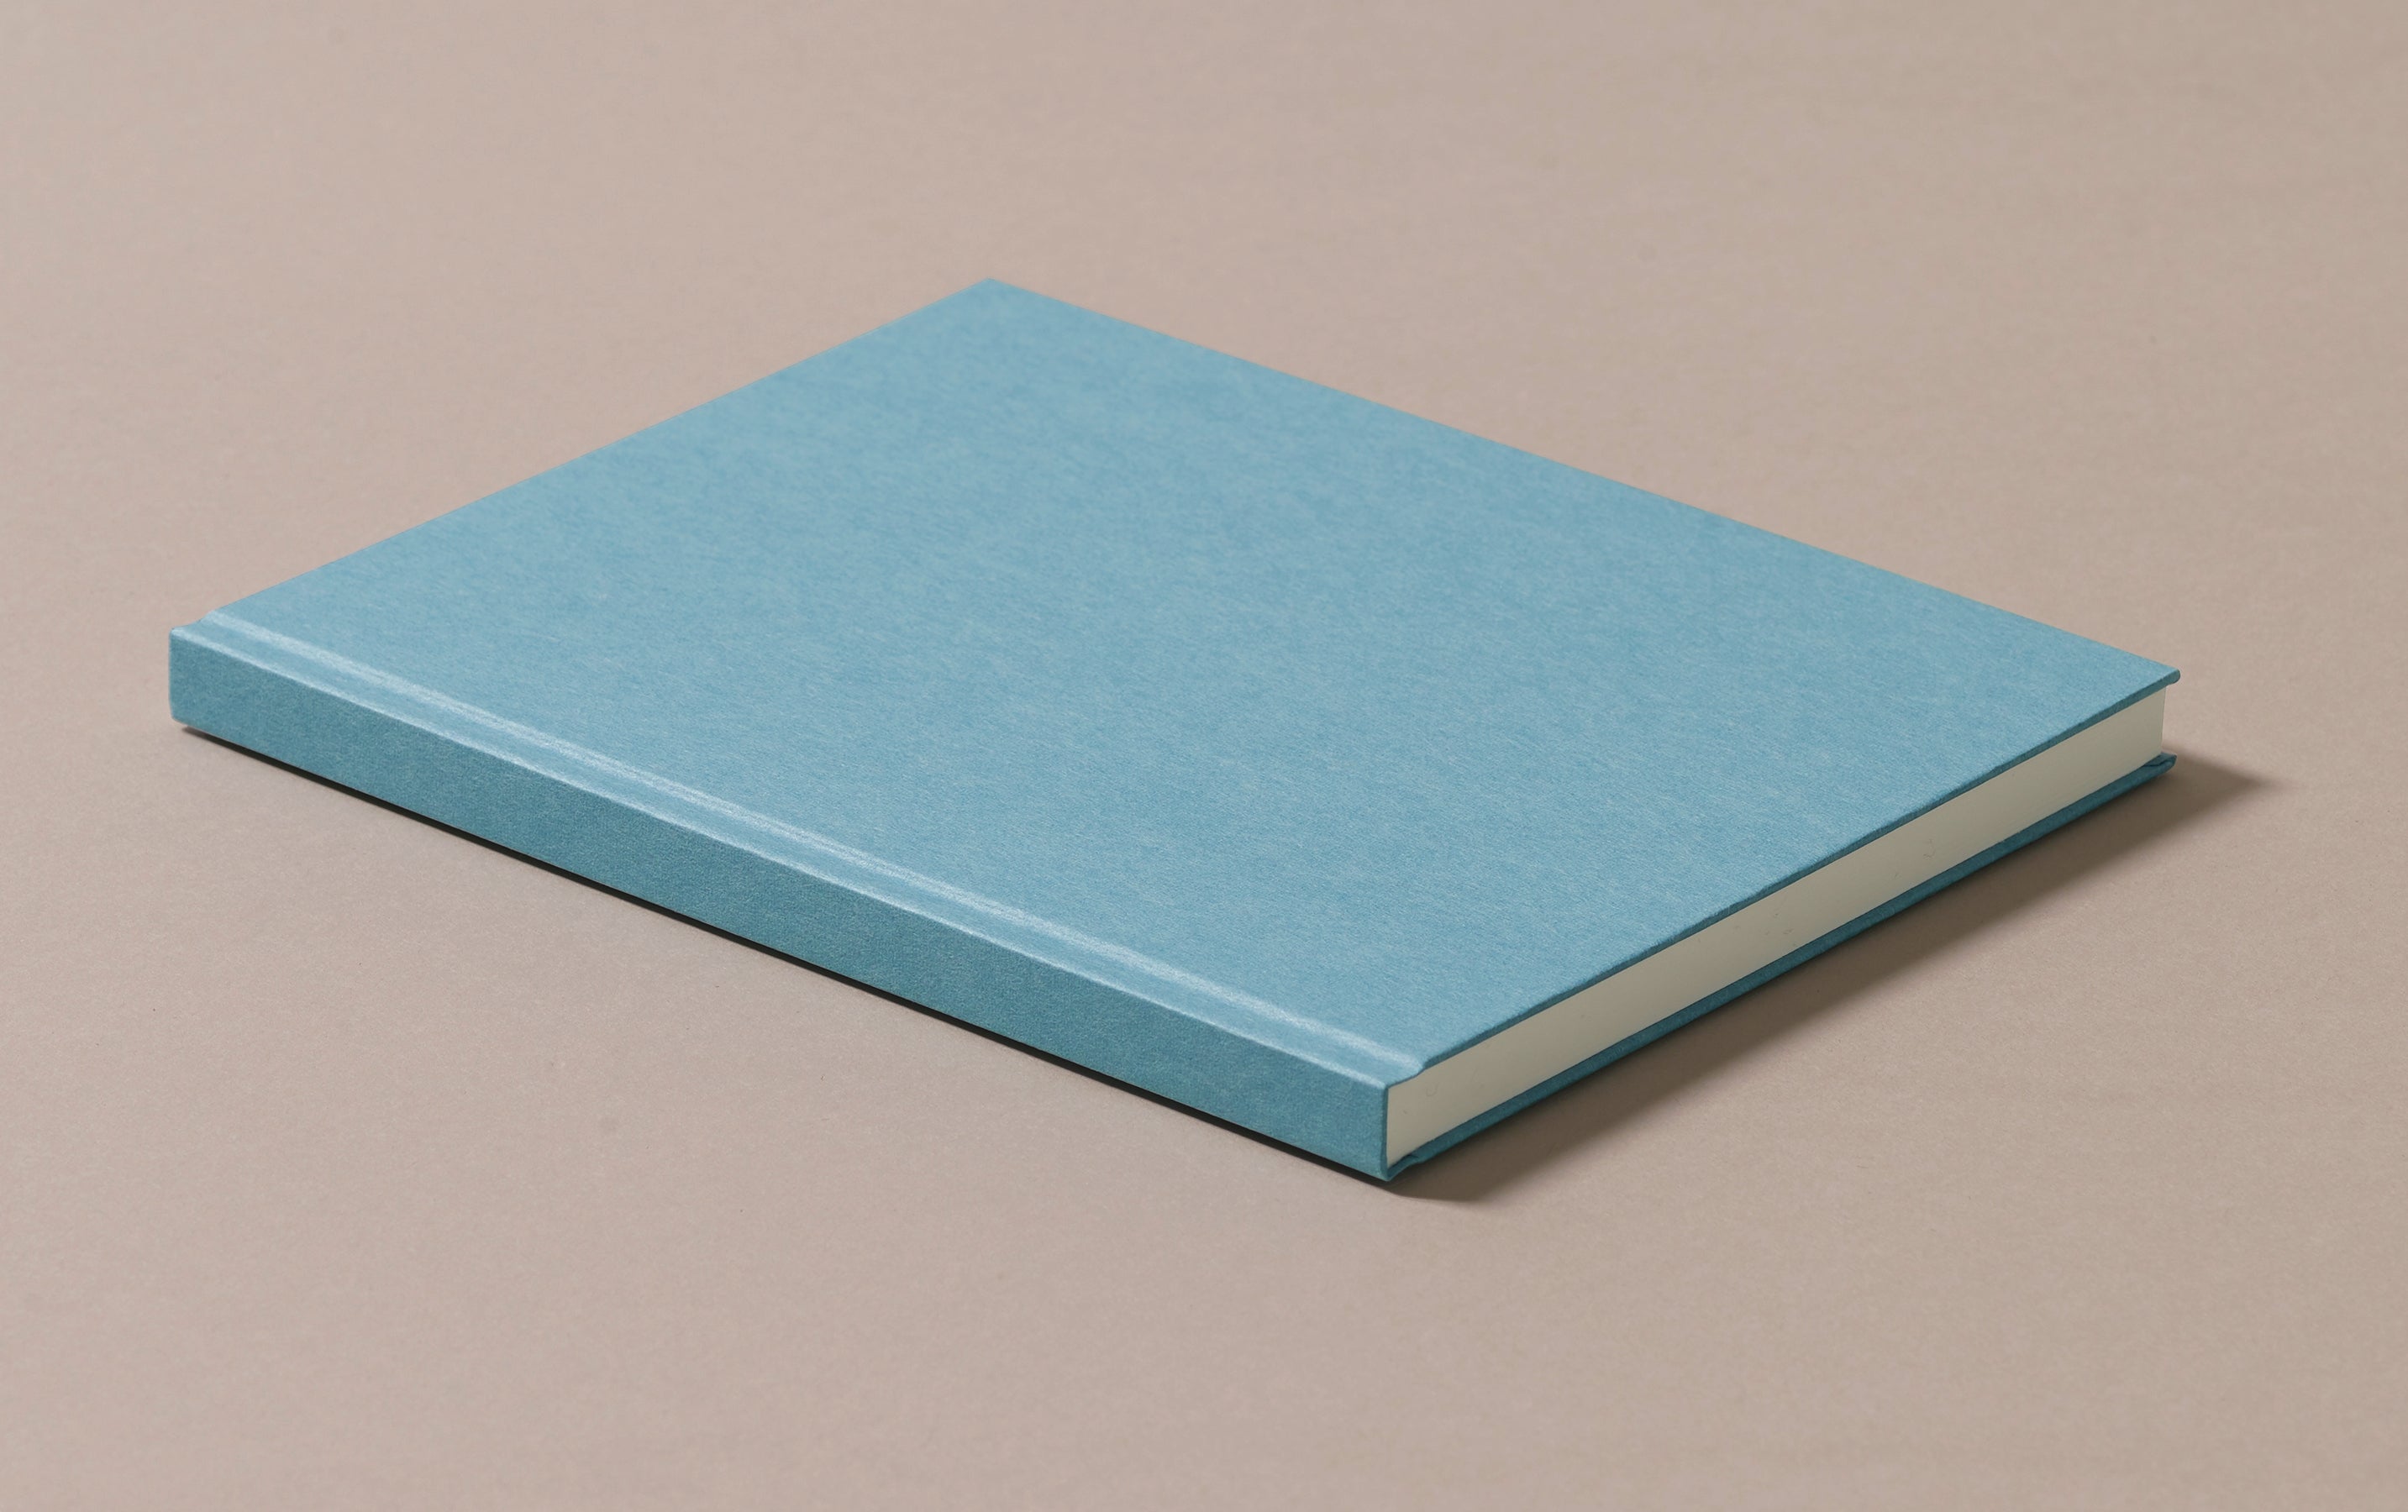 Sketchbook for Drawing and Mixed Media - Brushed Metal Blue